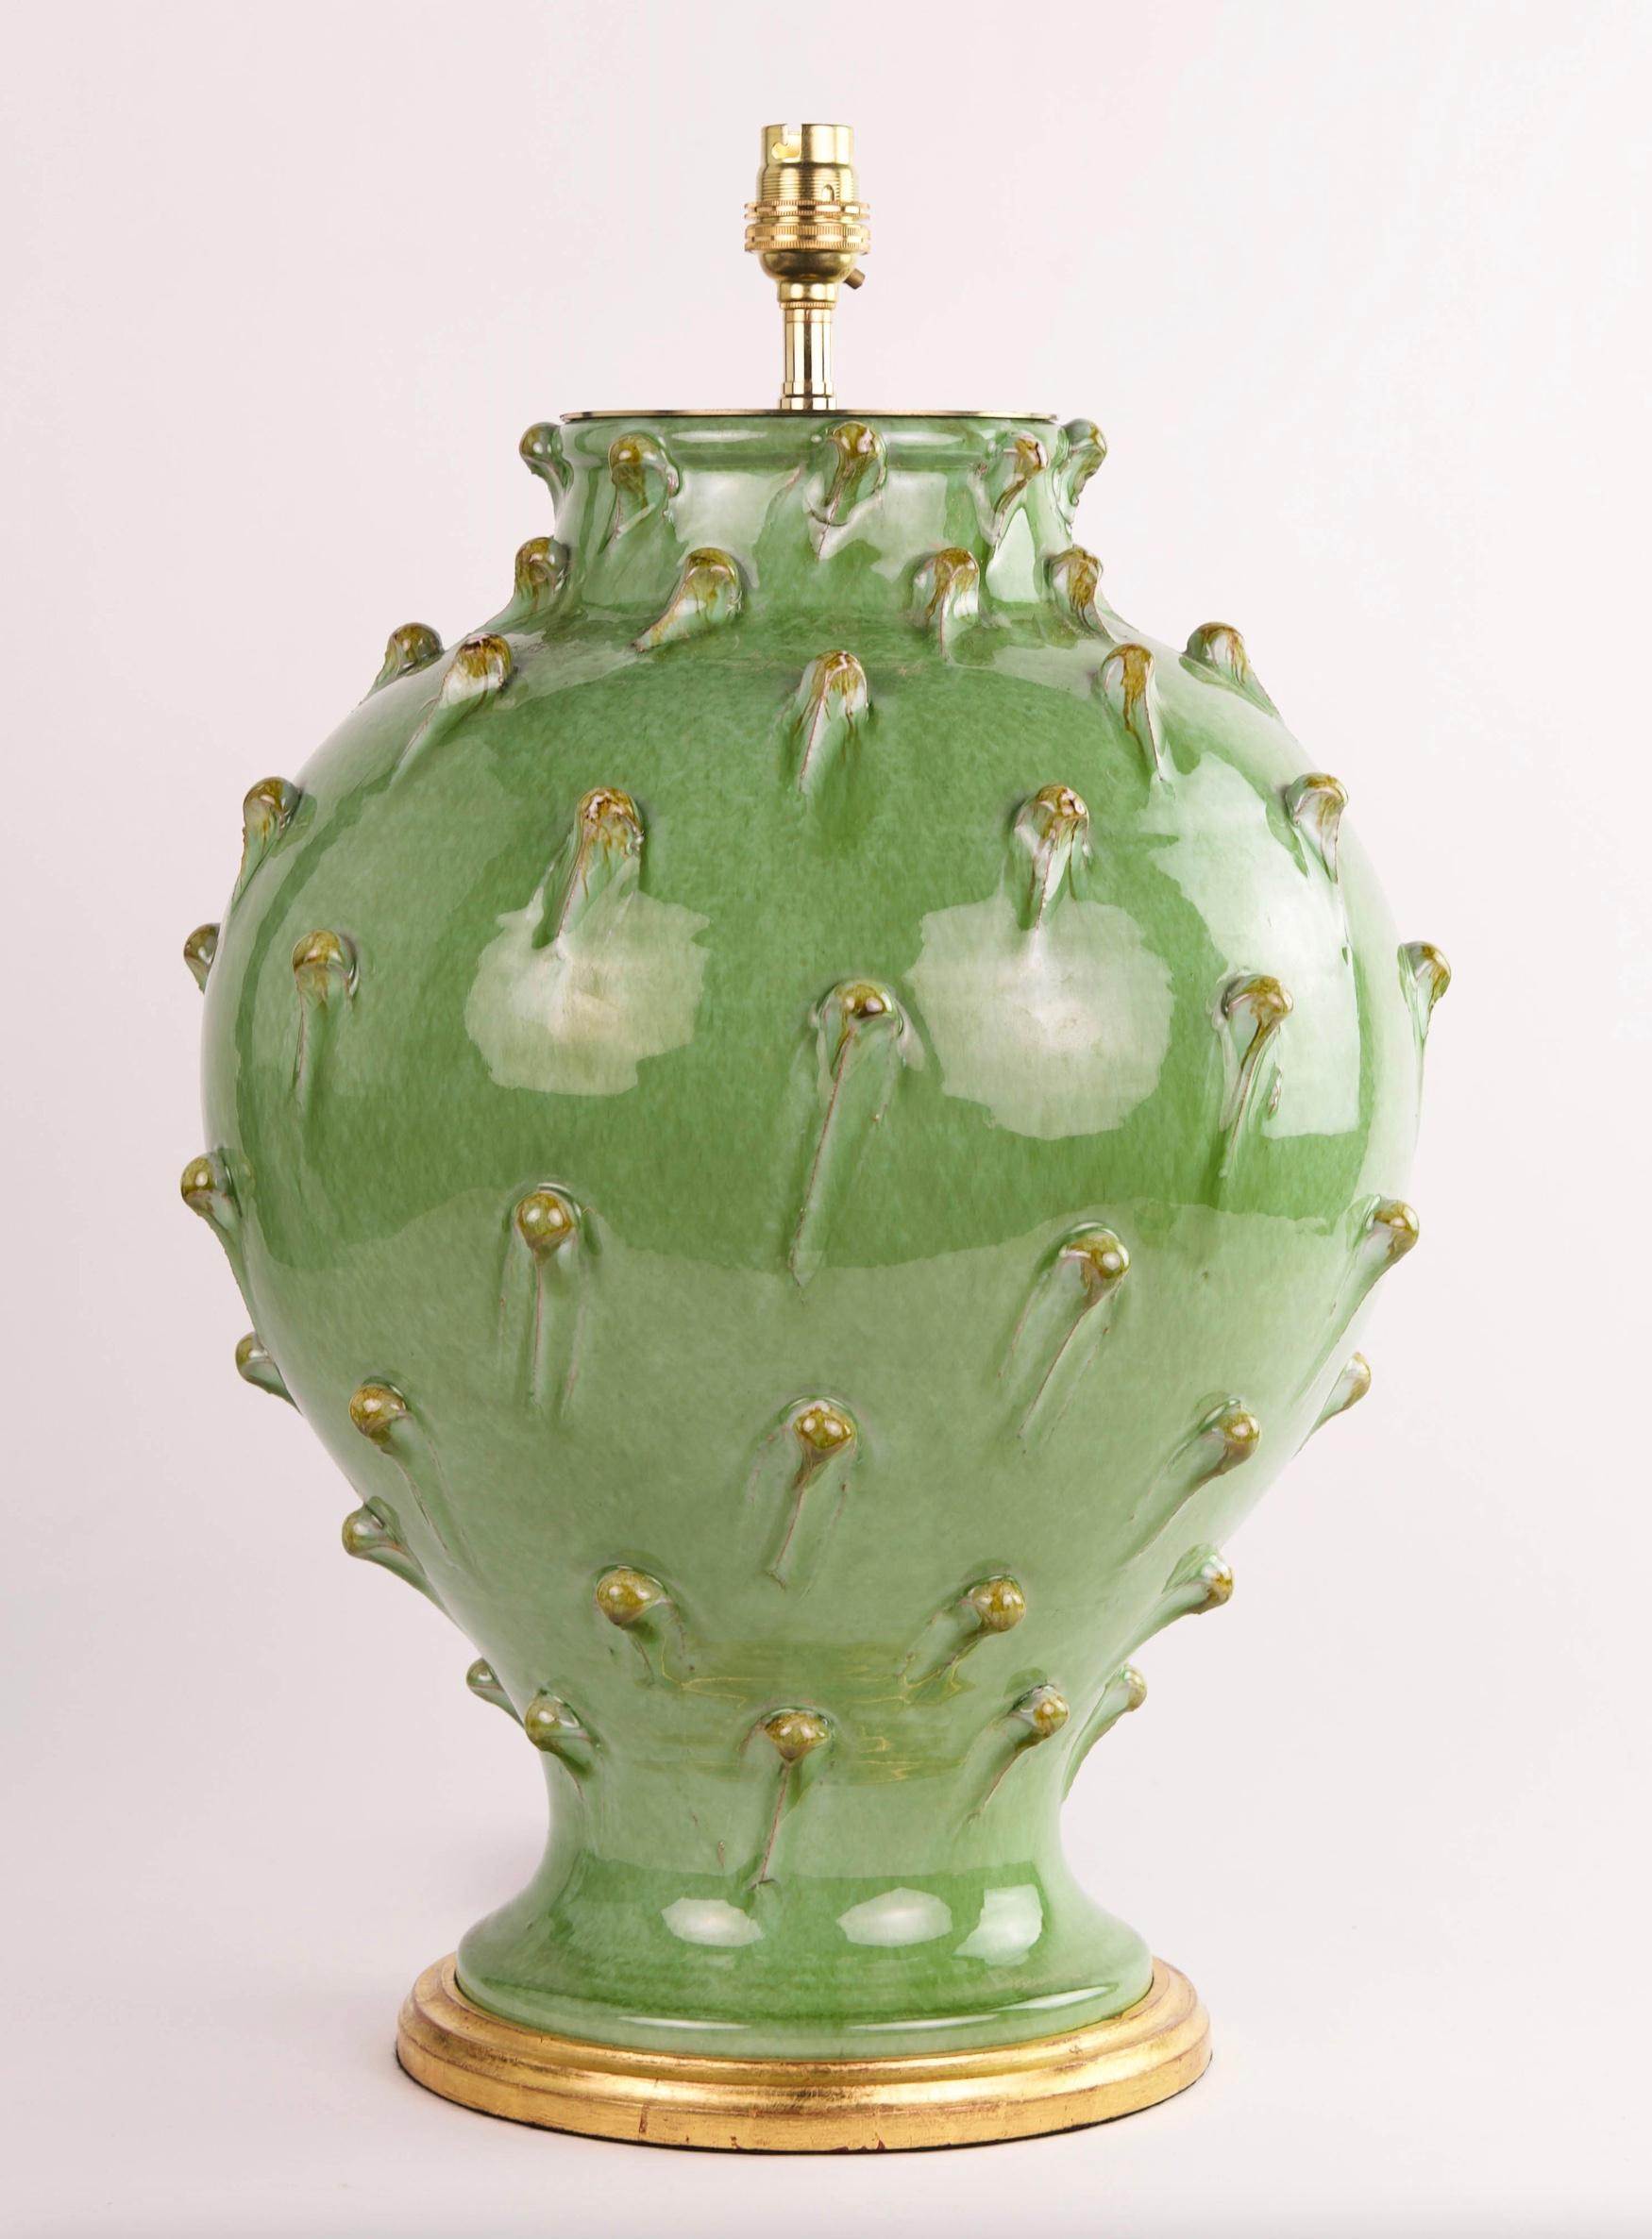 A wonderful mid 20th century Italian design green glazed table lamp, now mounted as a lamp with a hand gilded turned base.

Measure: Height of vase: 16 1/2 in (42 cm) including giltwood base but excluding electical fitment and lampshade.

All of